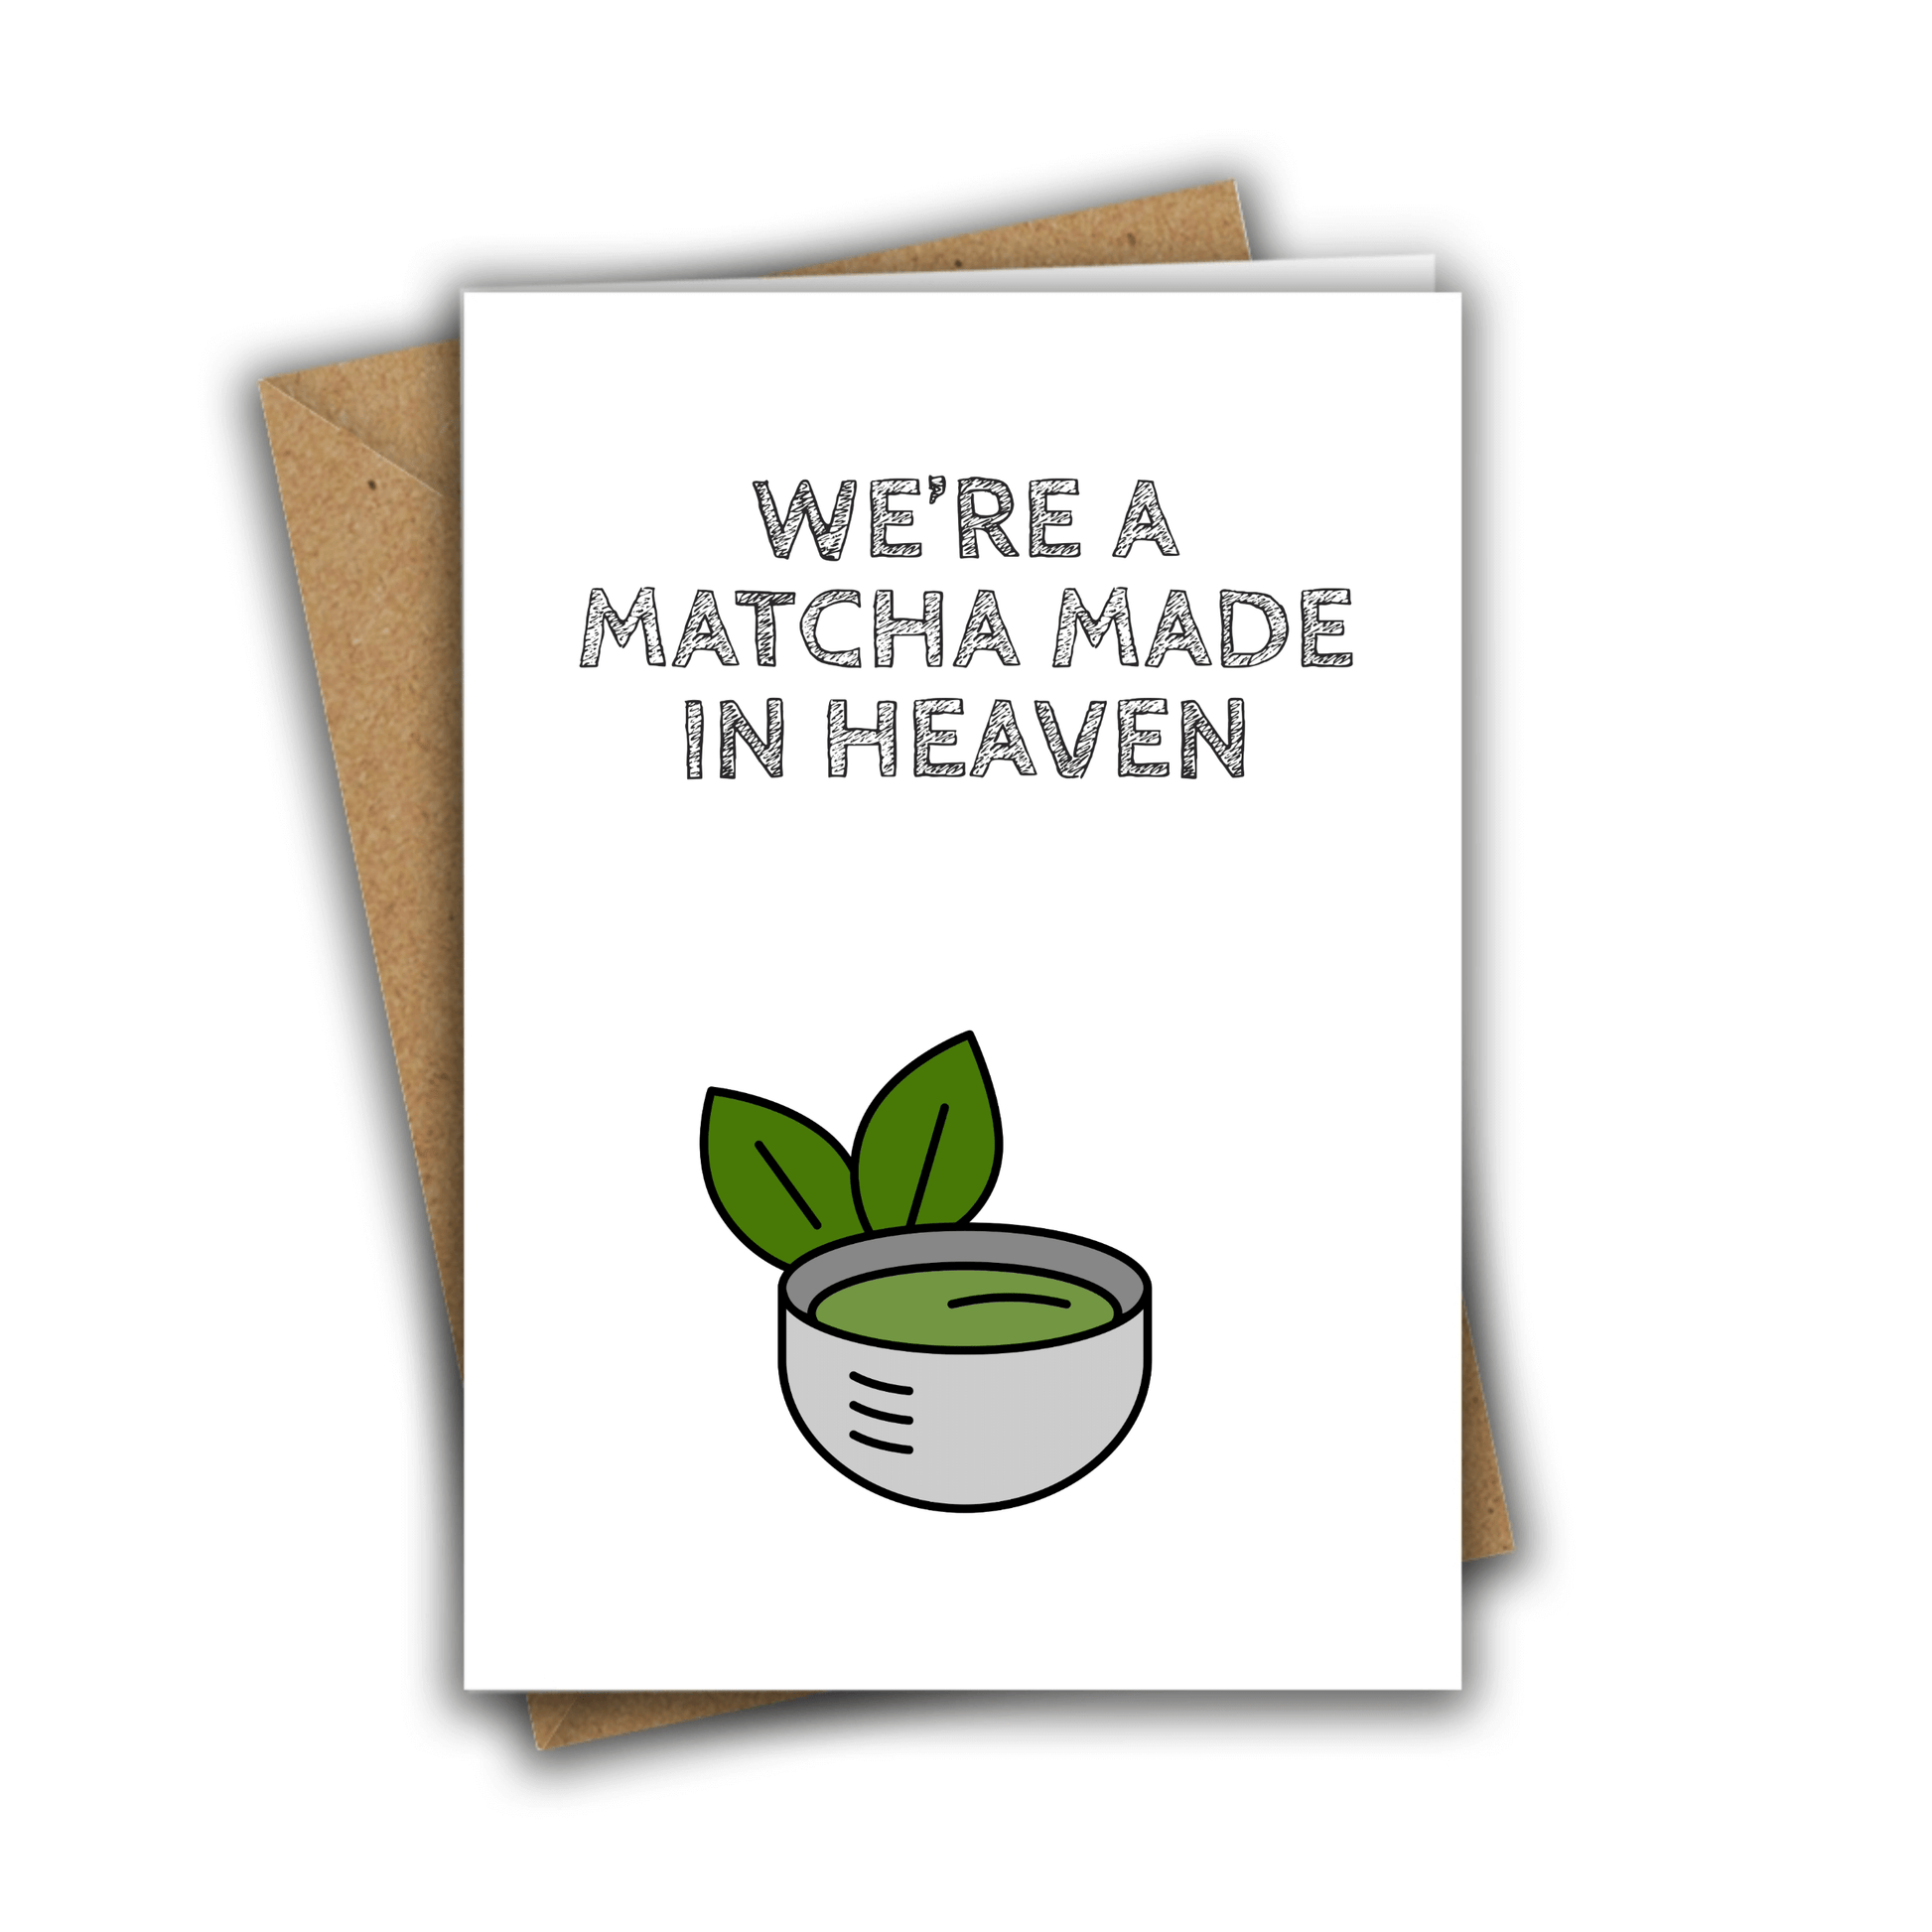 Little Kraken's We're a Matcha Made in Heaven, Love Cards for £3.50 each